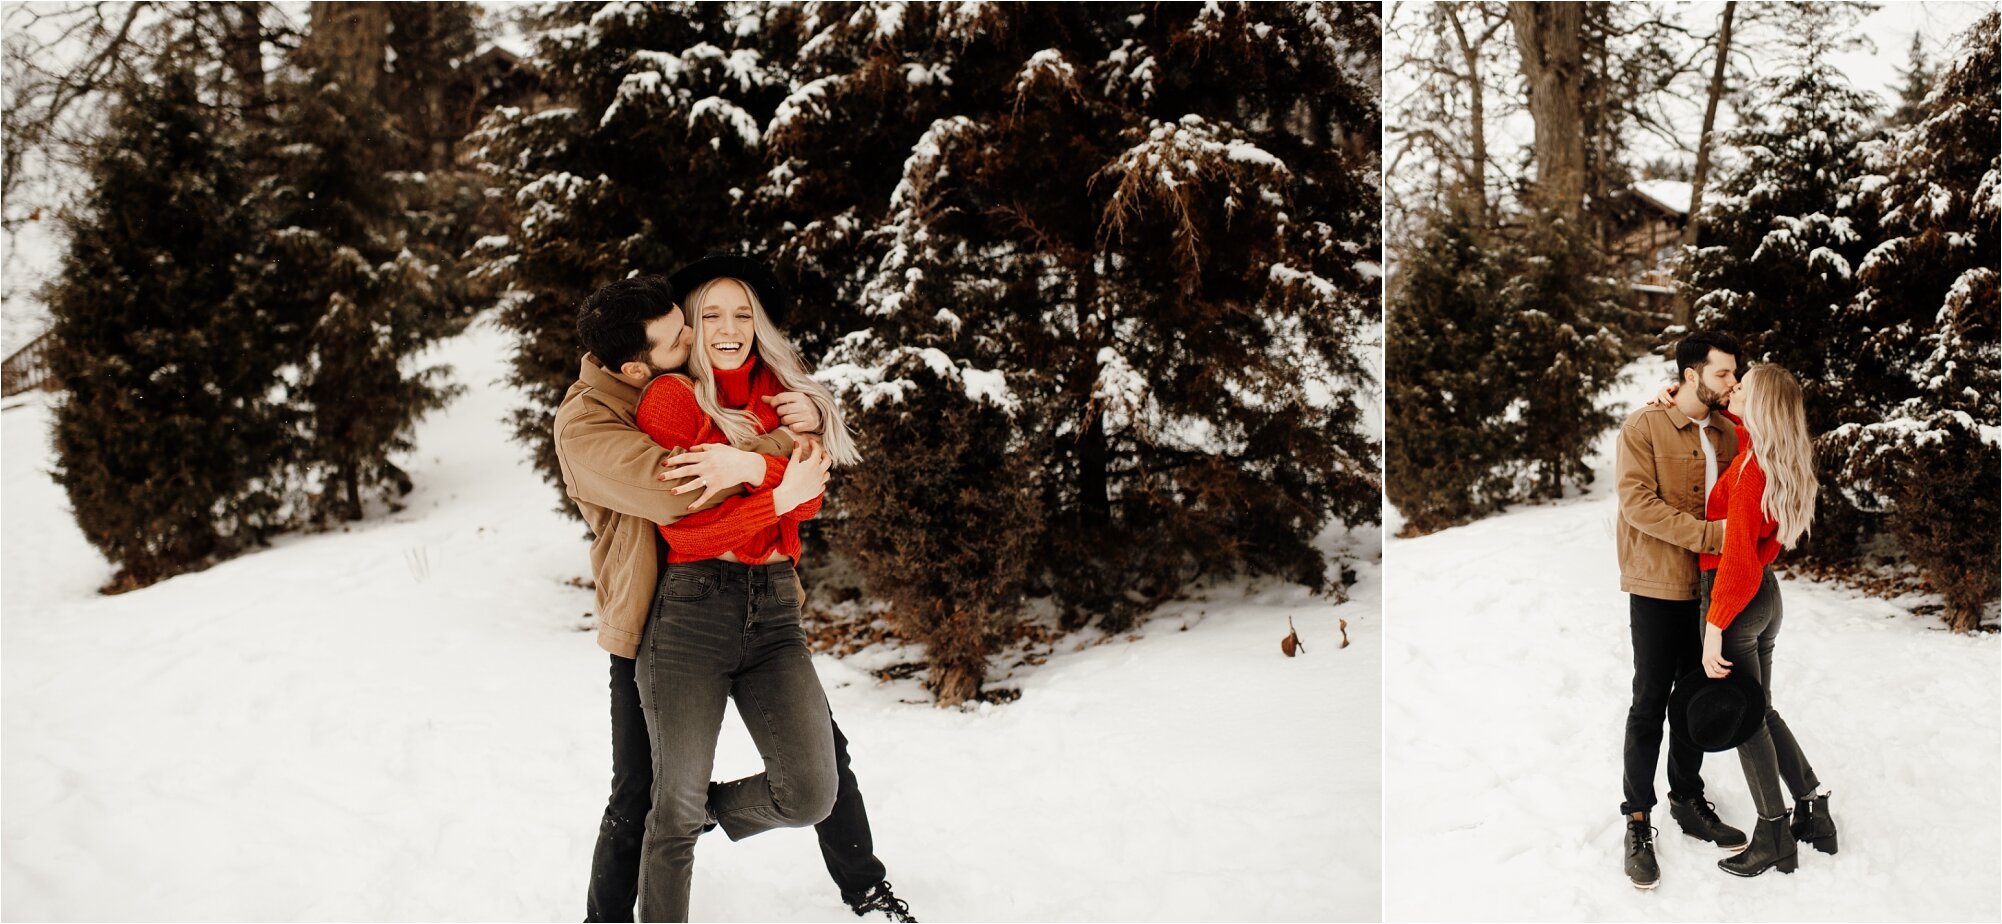  winter engagement session at theodore wirth regional park in minnesota couple couples engaged photography 